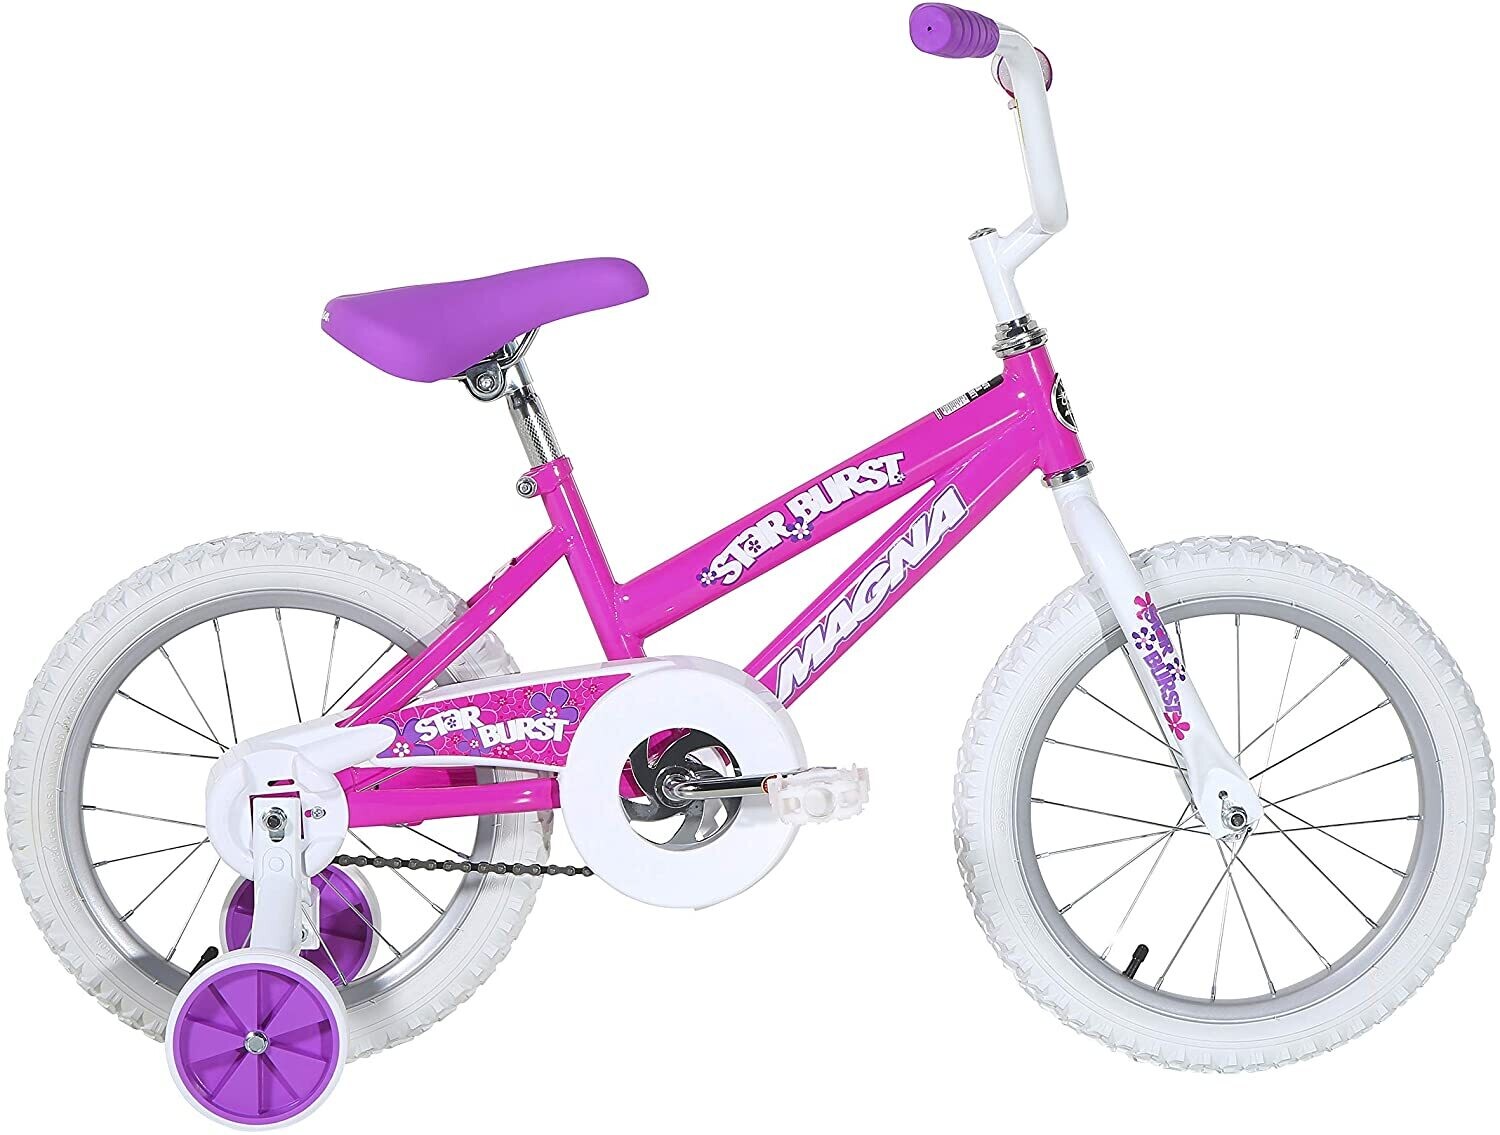 Dynacraft Magna Kids Bike Girls 16'' Inch Wheels with Training Wheels in Purple, Teal and Pink for Ages 4 and Up